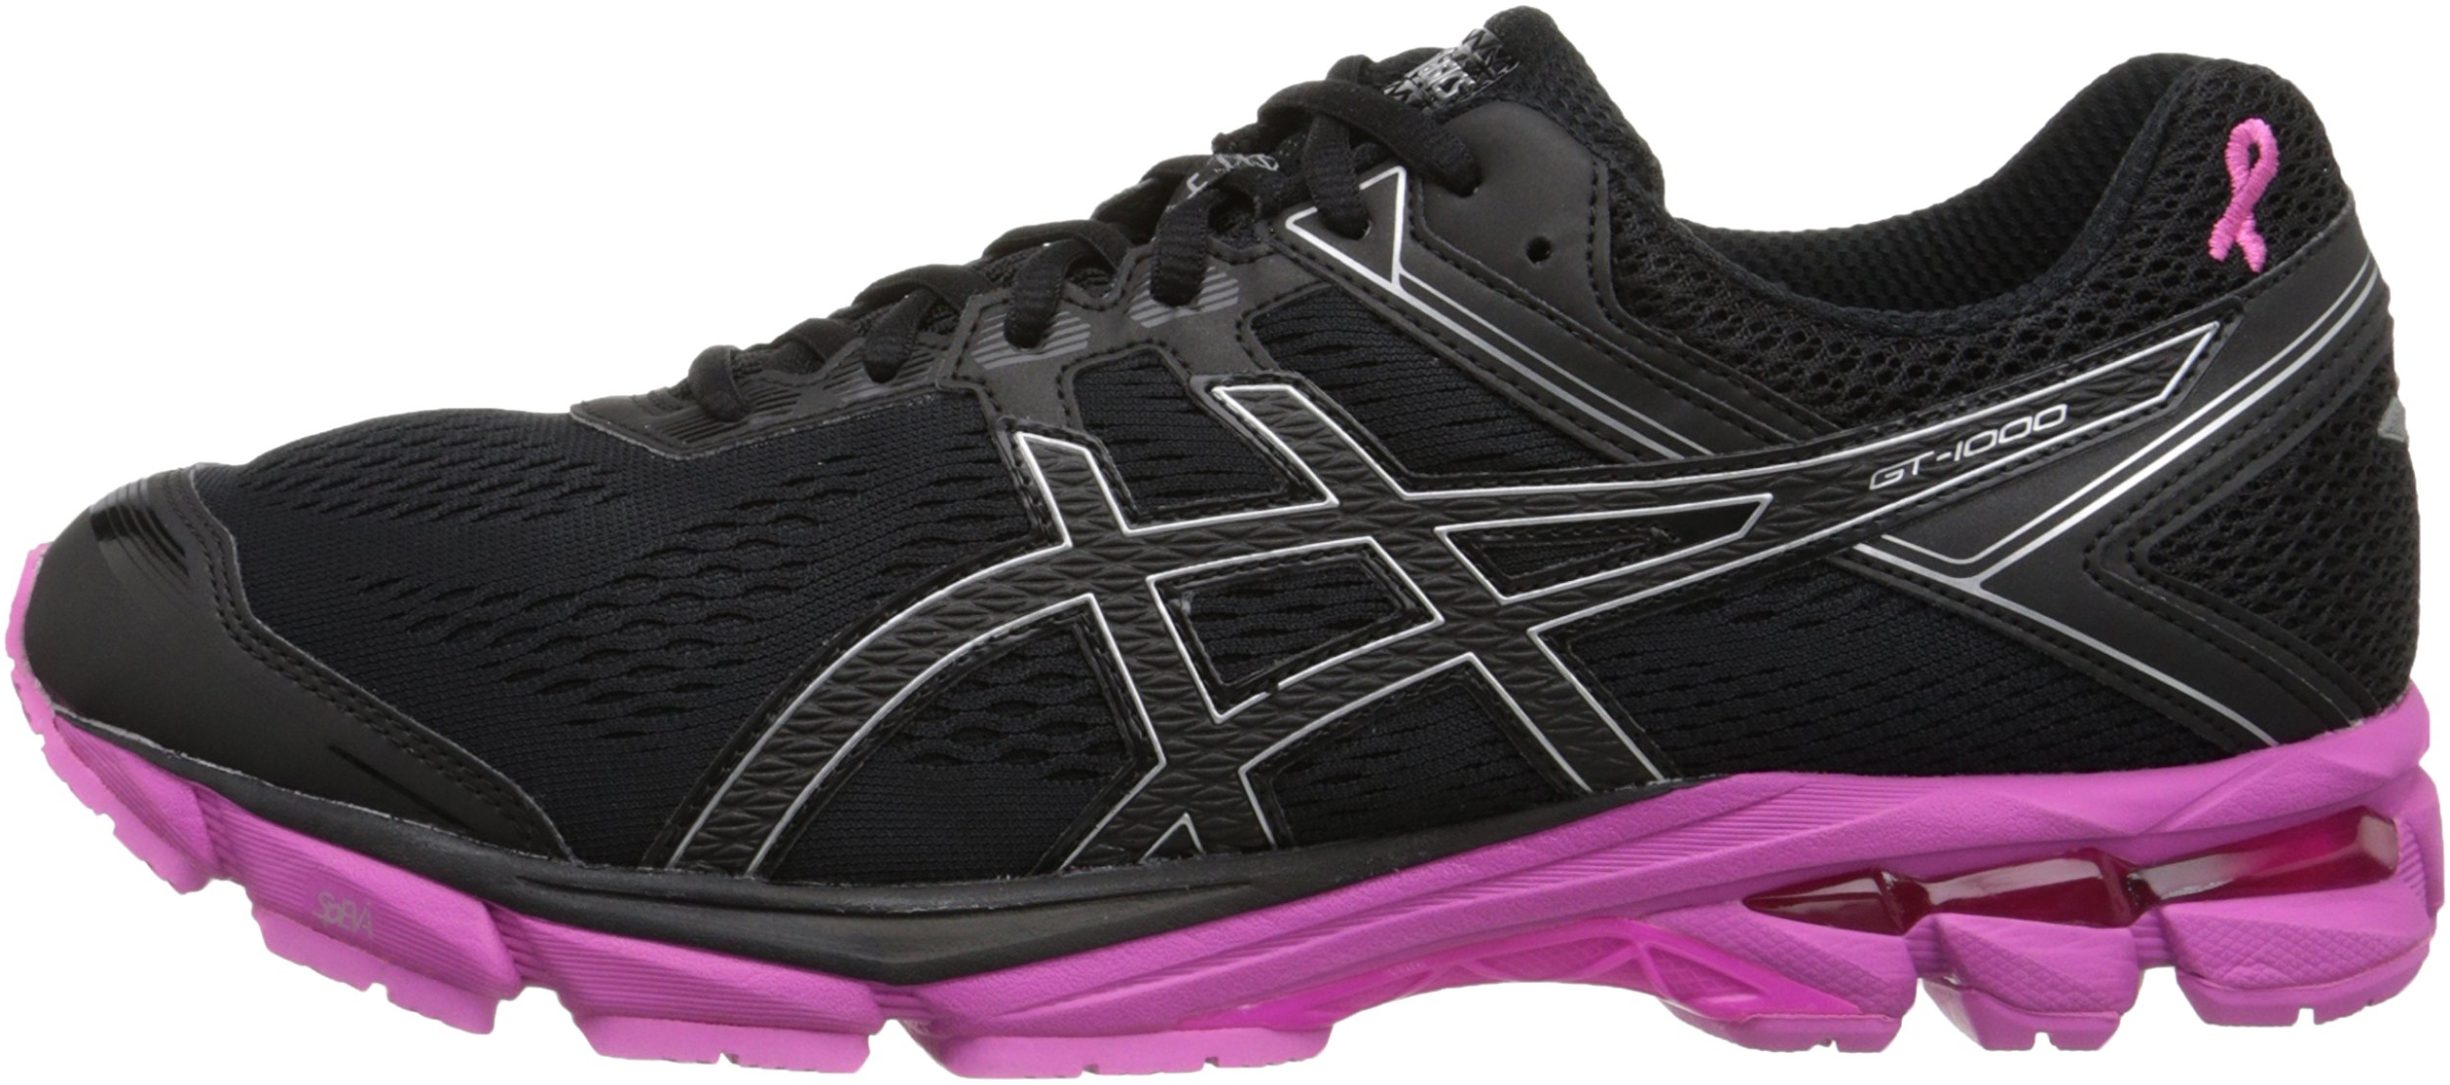 Only $55 + Review of Asics GT 1000 4 